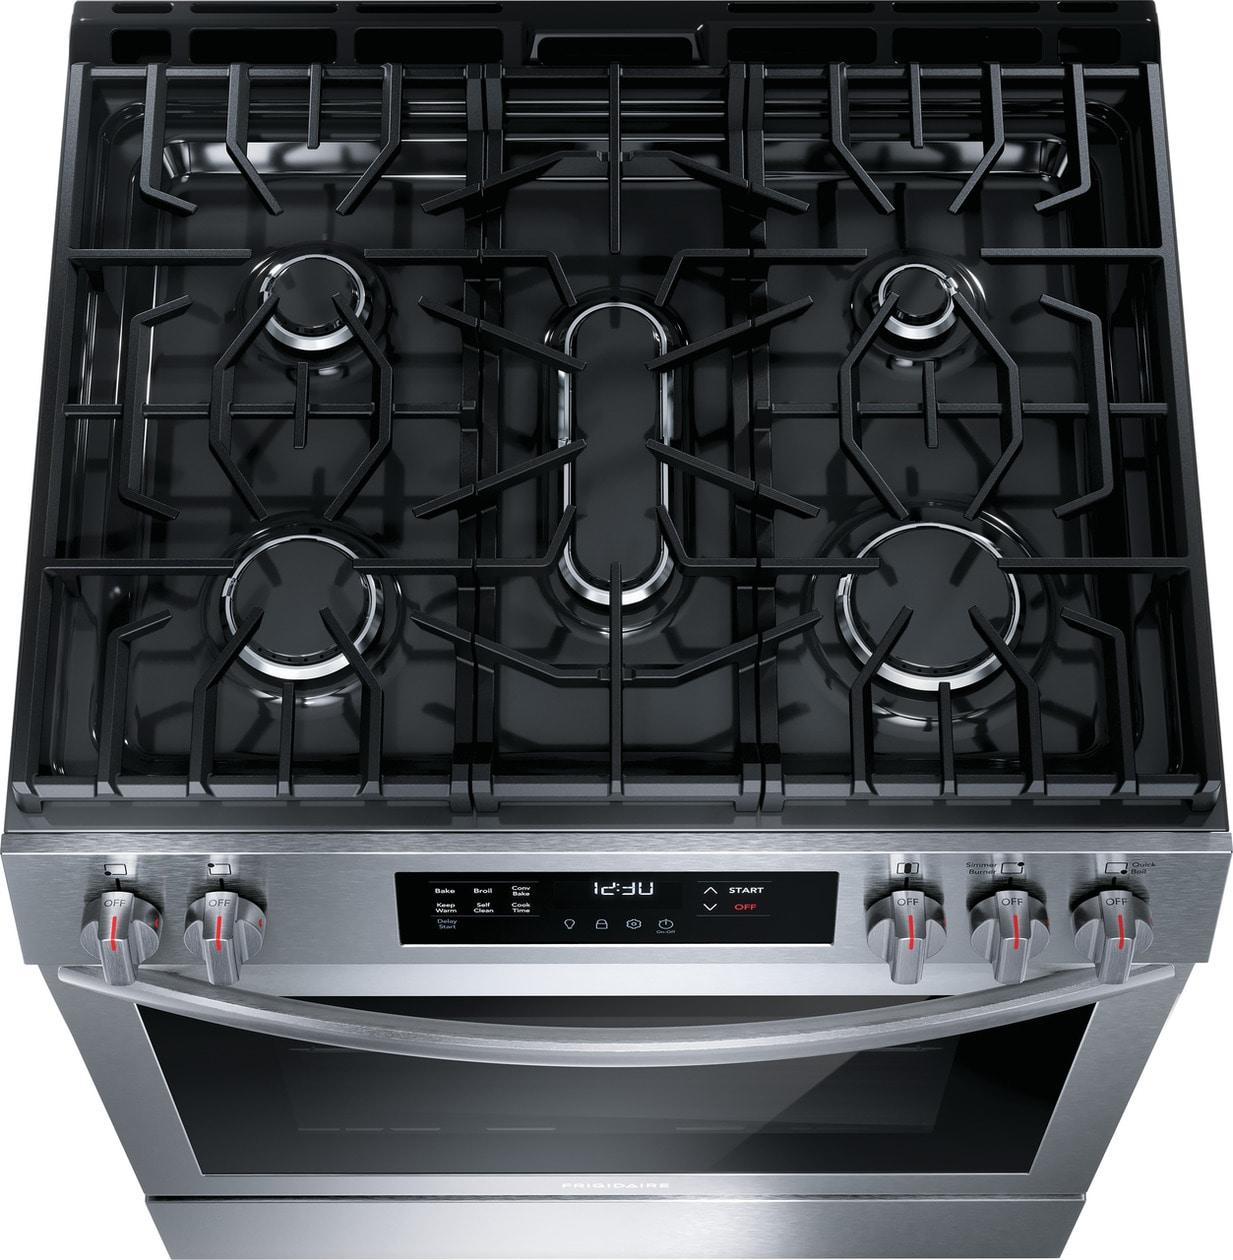 Frigidaire 30" Front Control Gas Range with Convection Bake